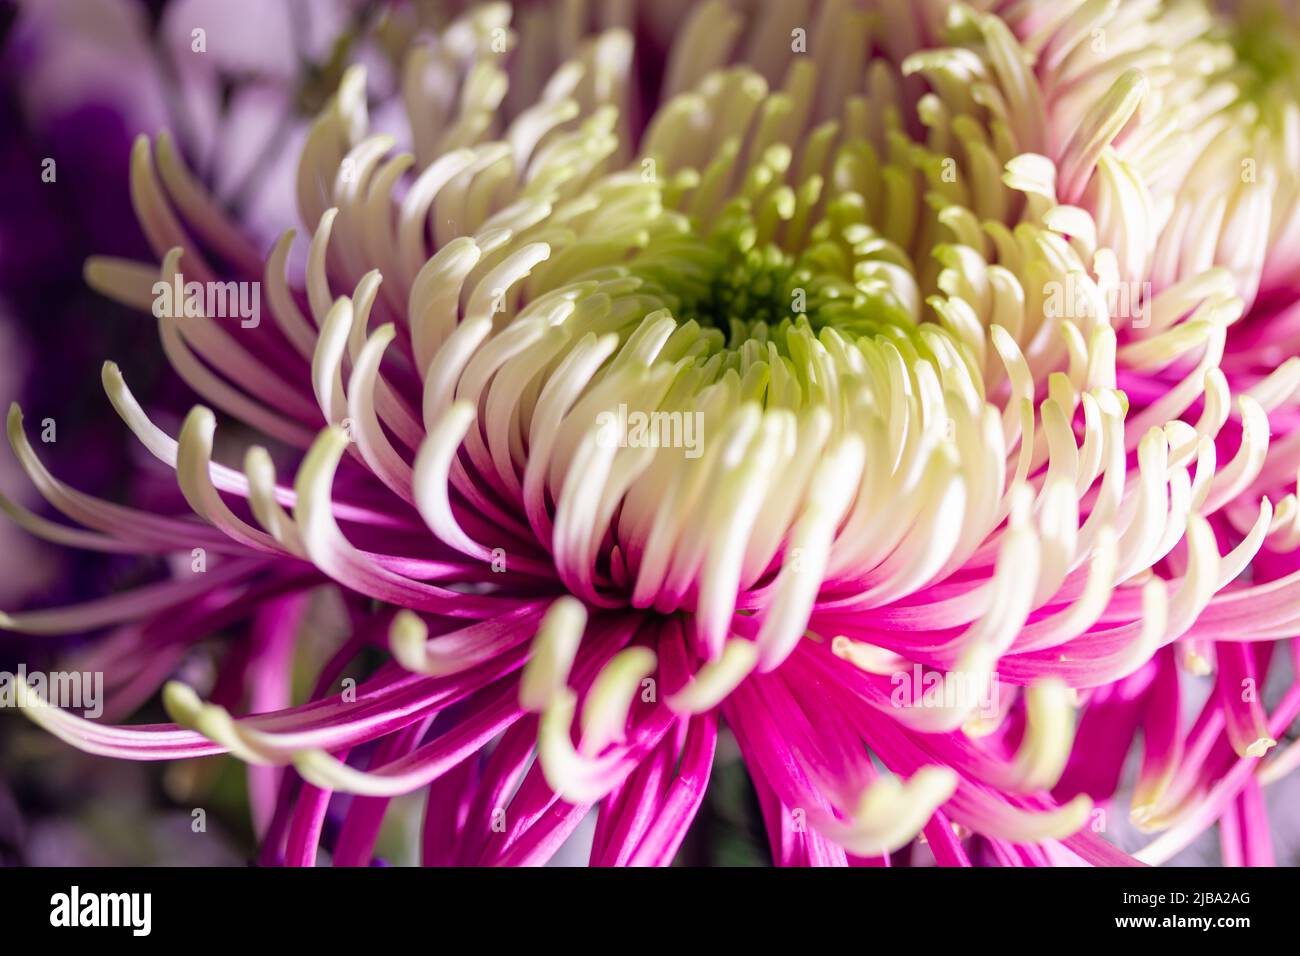 Large bud of beautiful chrysanthemum Rosanna Charlotte with pink and green petals macro photo. Duo toned chrysanthemum flower big blooms, collectively Stock Photo